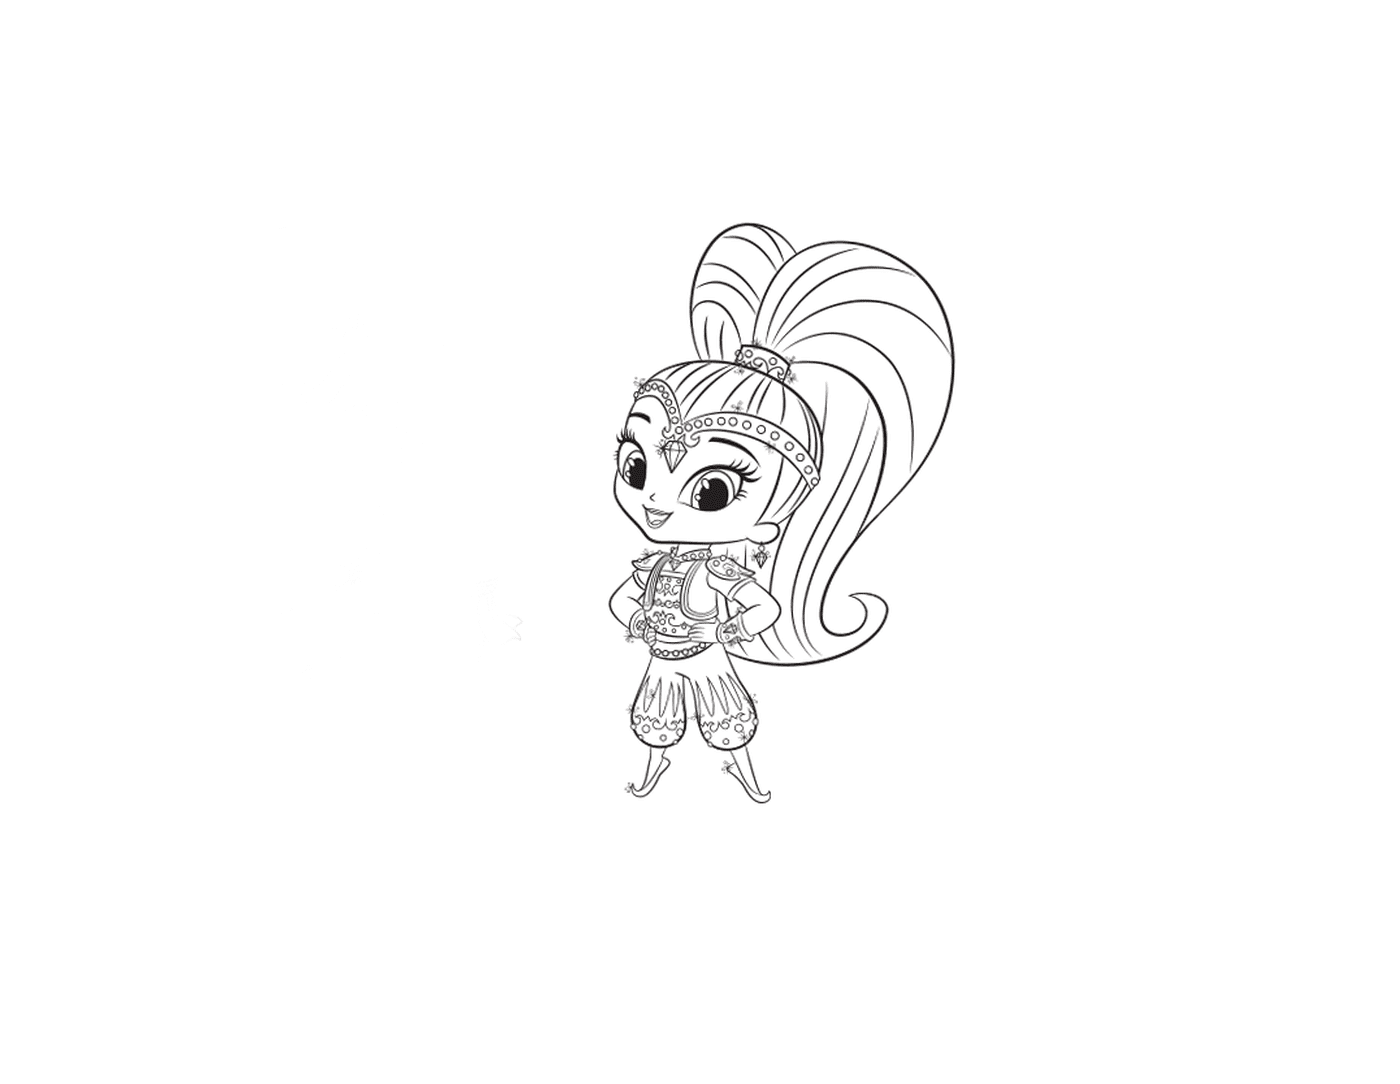  Nick Jr. from Shimmer and Shine 